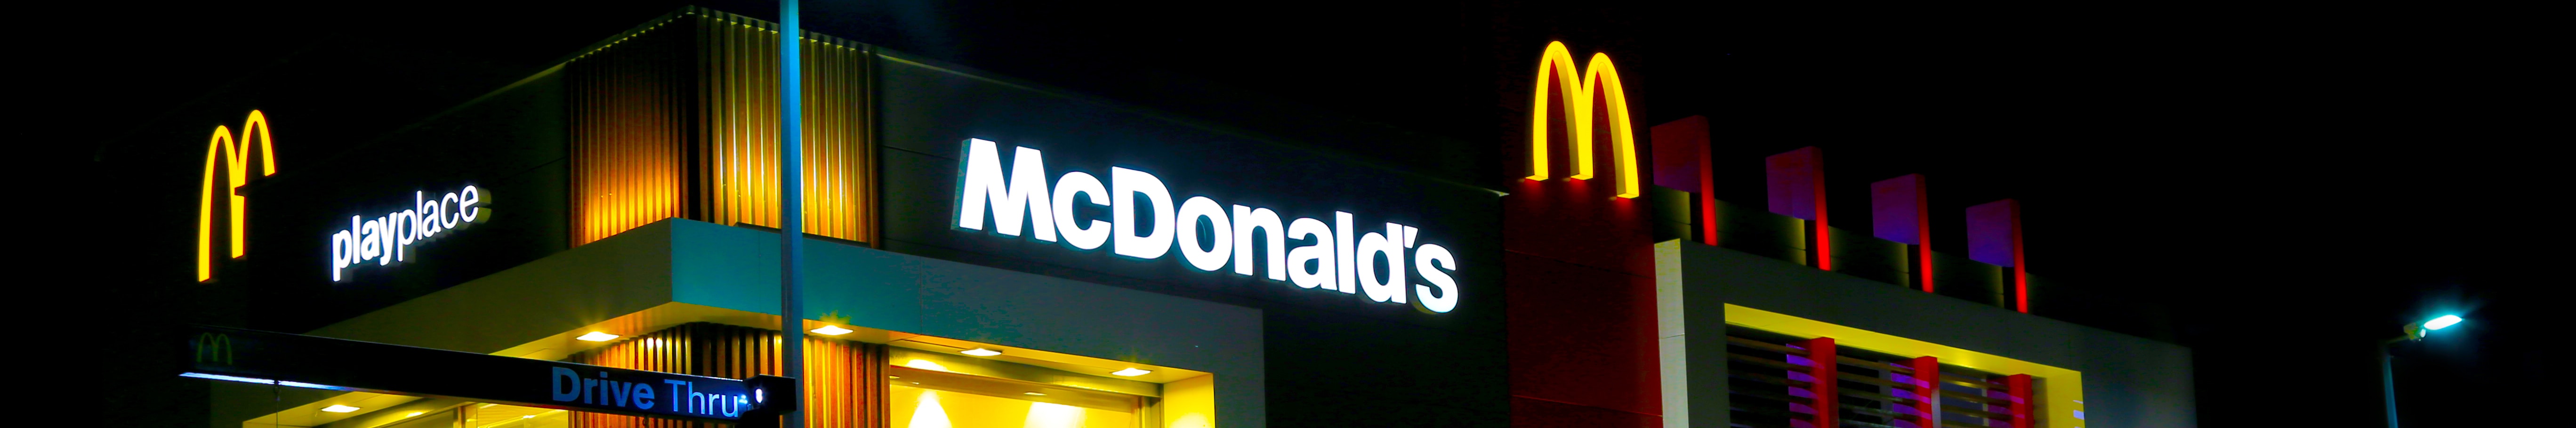 McDonald's exploits market dominance to drive franchisees out of business